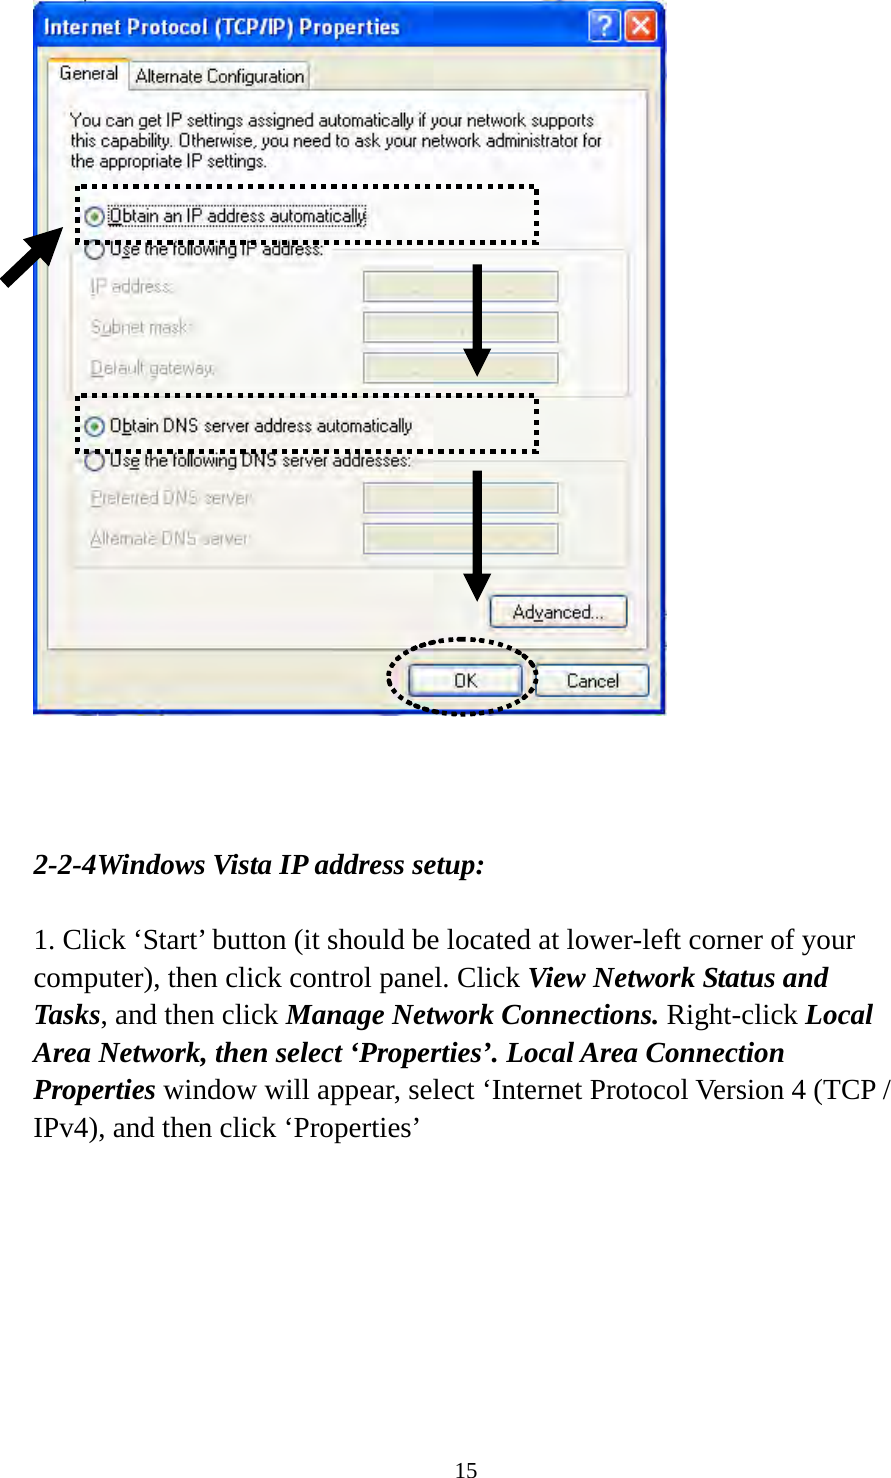 15     2-2-4Windows Vista IP address setup:  1. Click ‘Start’ button (it should be located at lower-left corner of your computer), then click control panel. Click View Network Status and Tasks, and then click Manage Network Connections. Right-click Local Area Network, then select ‘Properties’. Local Area Connection Properties window will appear, select ‘Internet Protocol Version 4 (TCP / IPv4), and then click ‘Properties’  